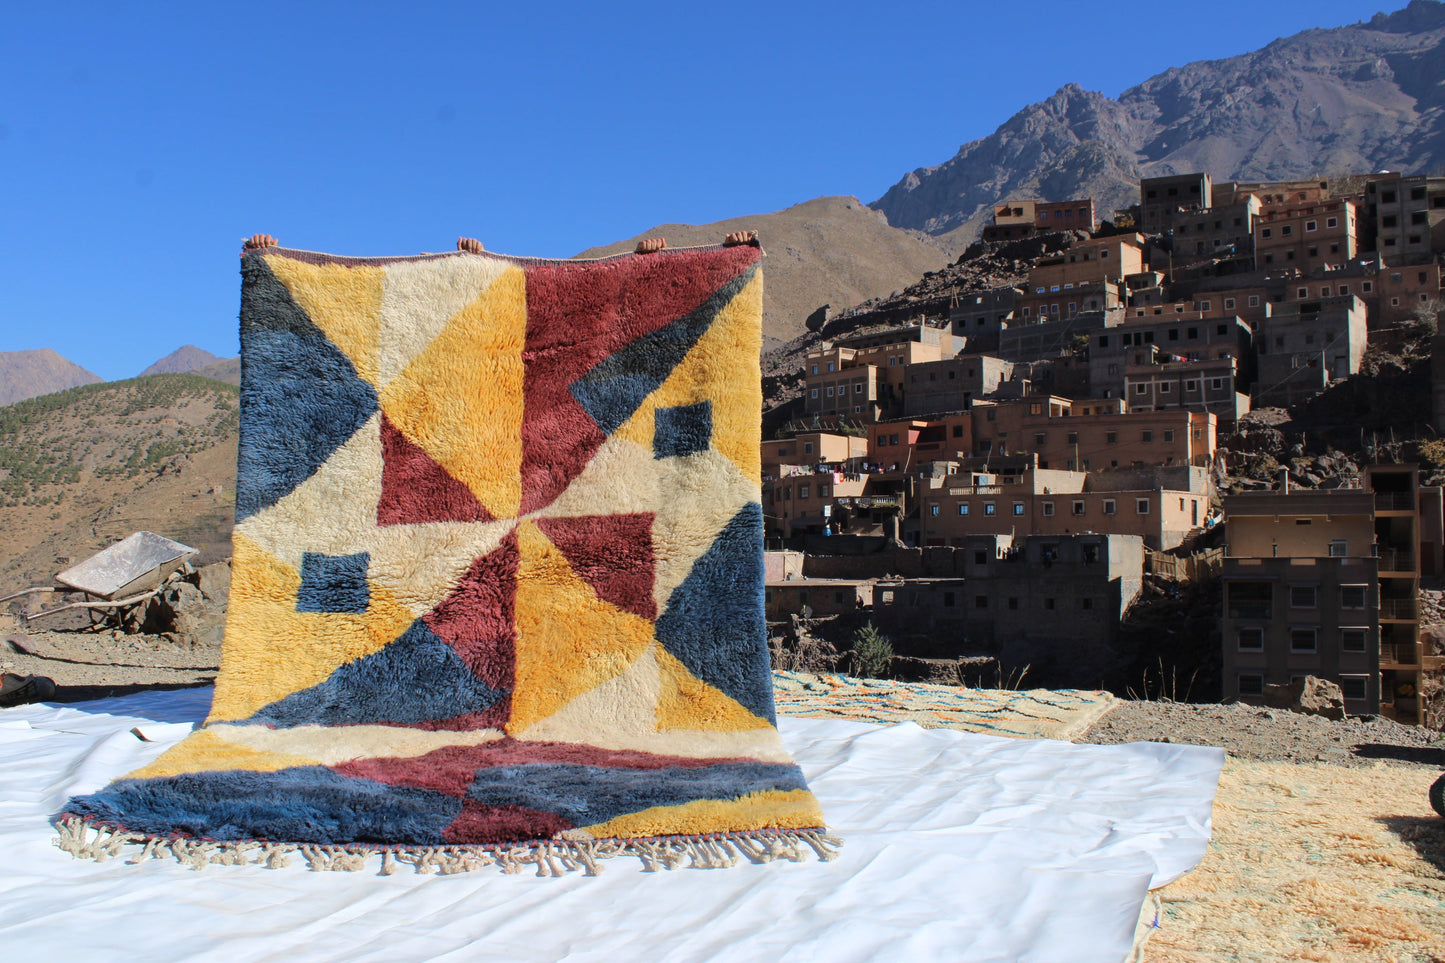 Beni Ourain rugs originate from the Atlas Mountains of Morocco and are characterized by their distinctive, neutral-toned, and geometric designs. These handwoven rugs often feature a plush pile and are made by the Berber tribes,  size is 300x180 cm